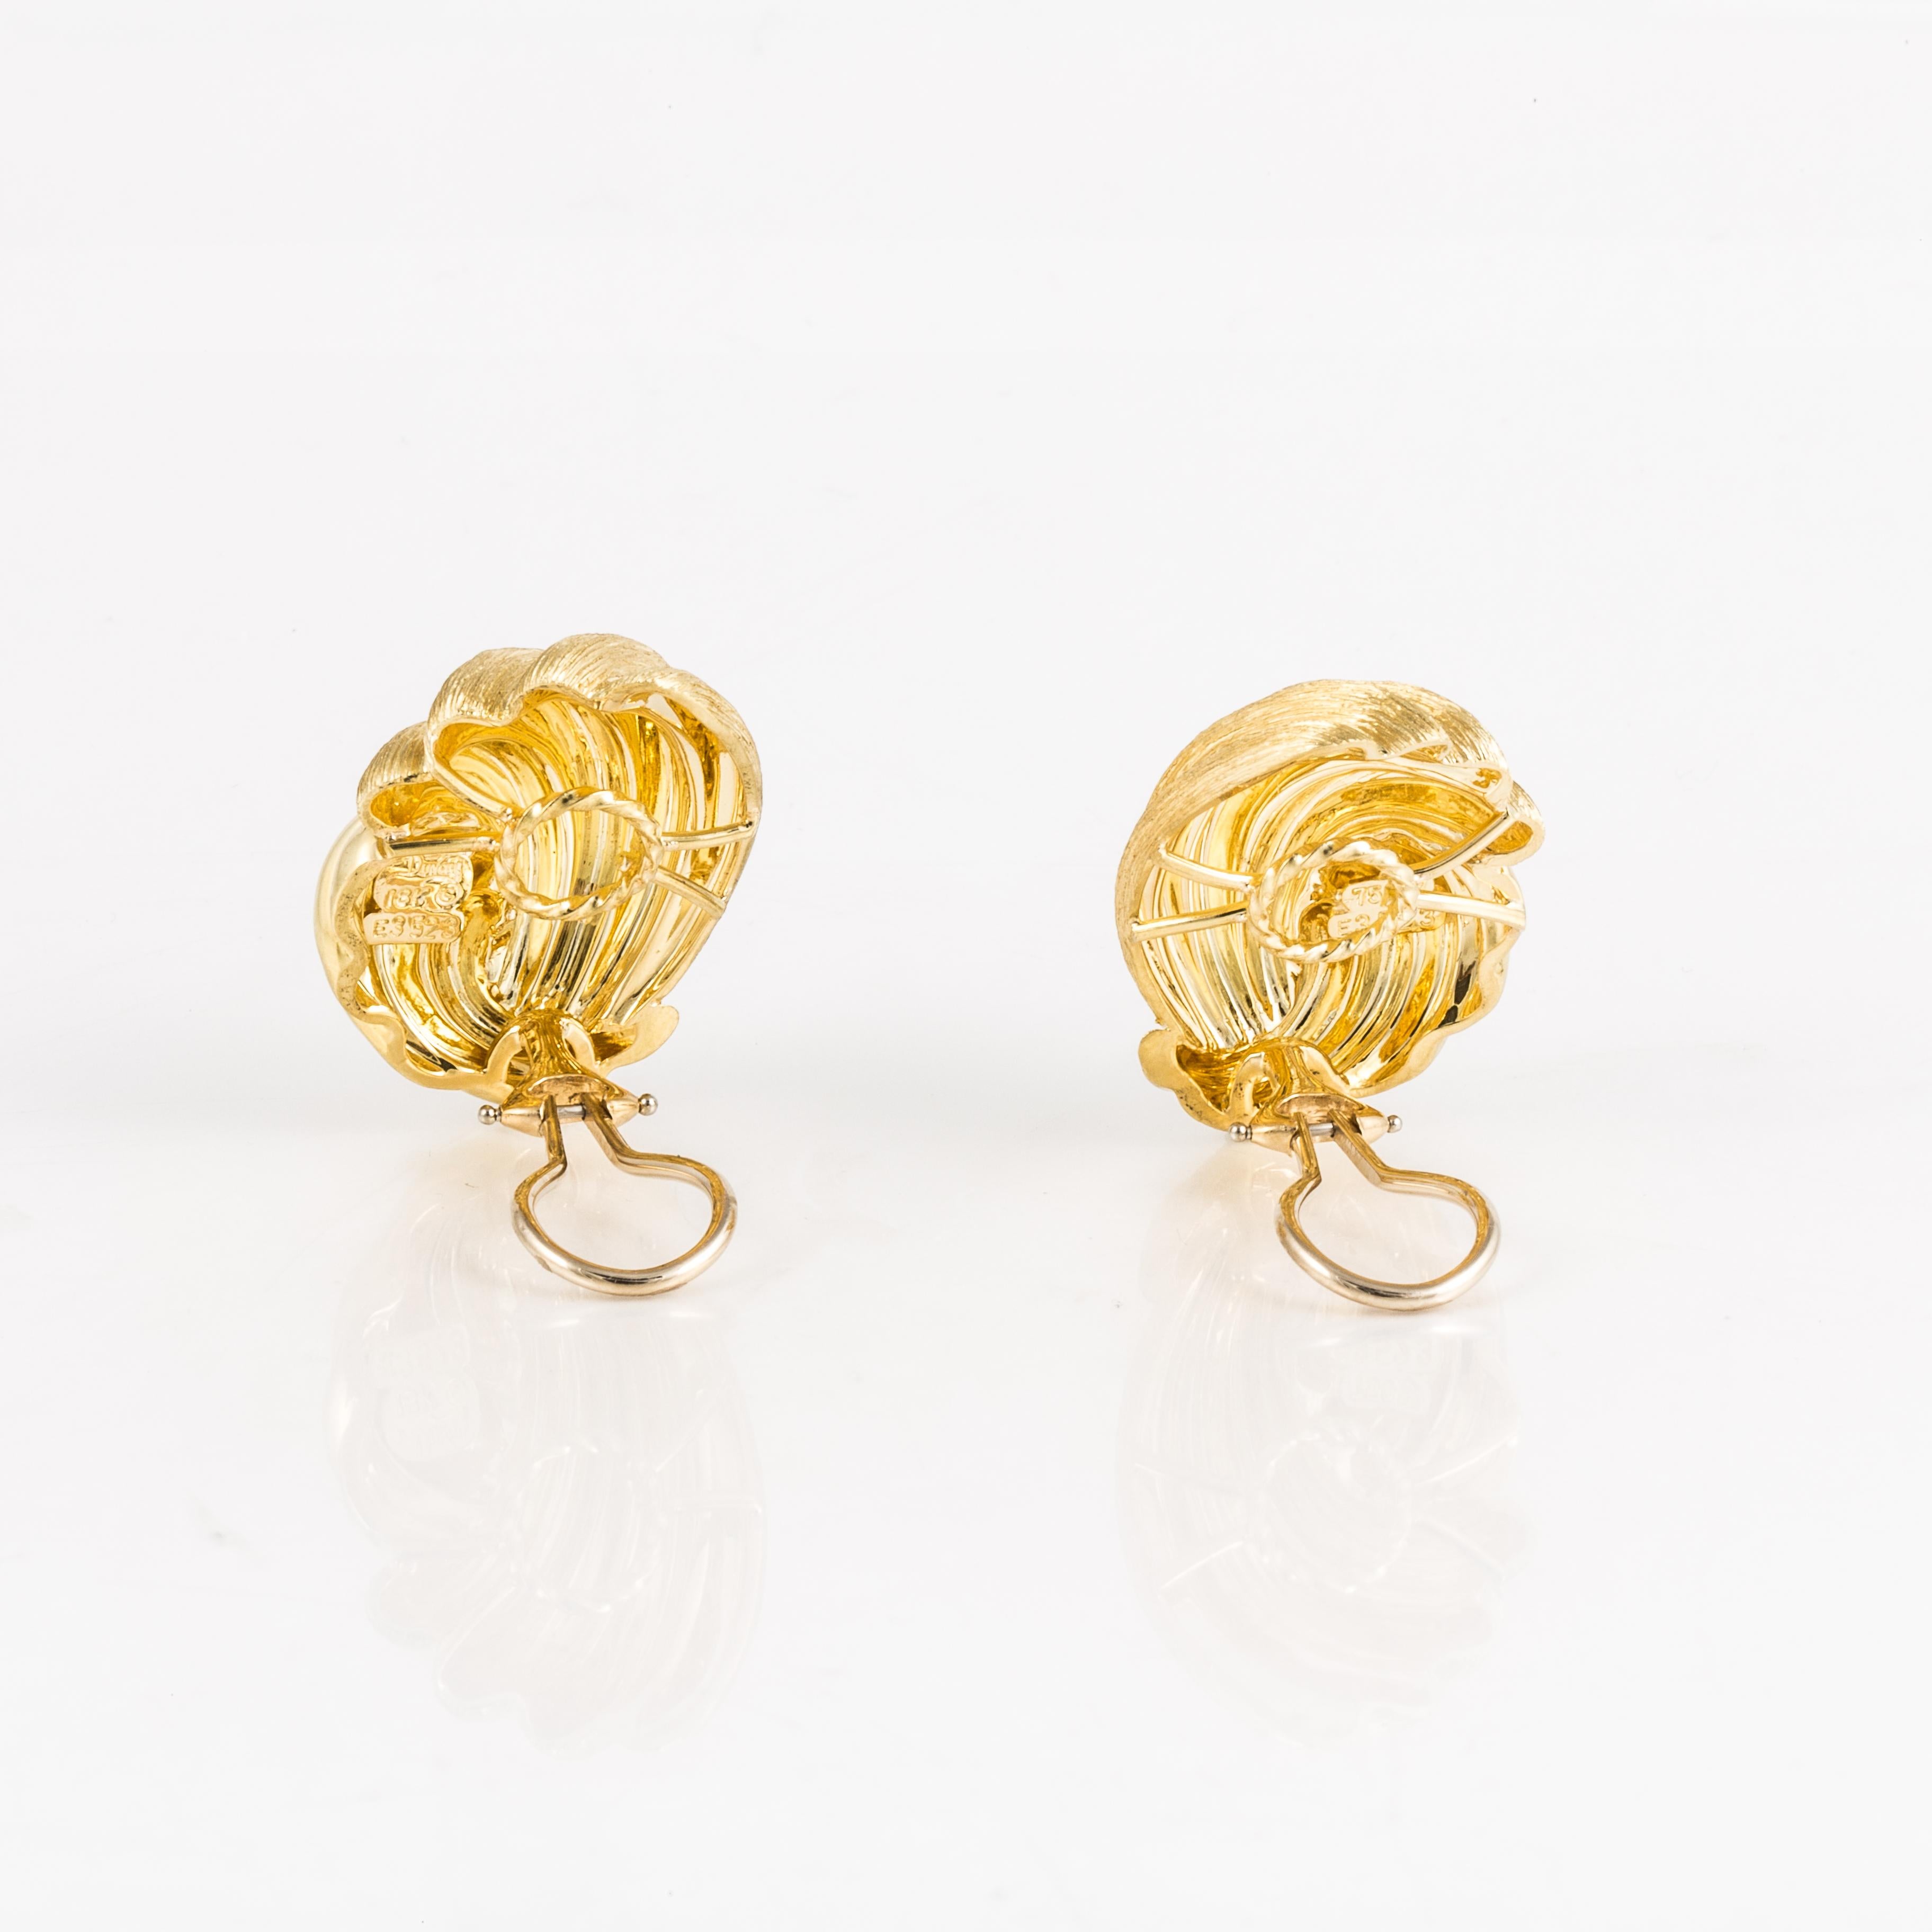 Henry Dunay earrings in 18K yellow gold with the Sabi finish and a high polish finish.  They are marked 